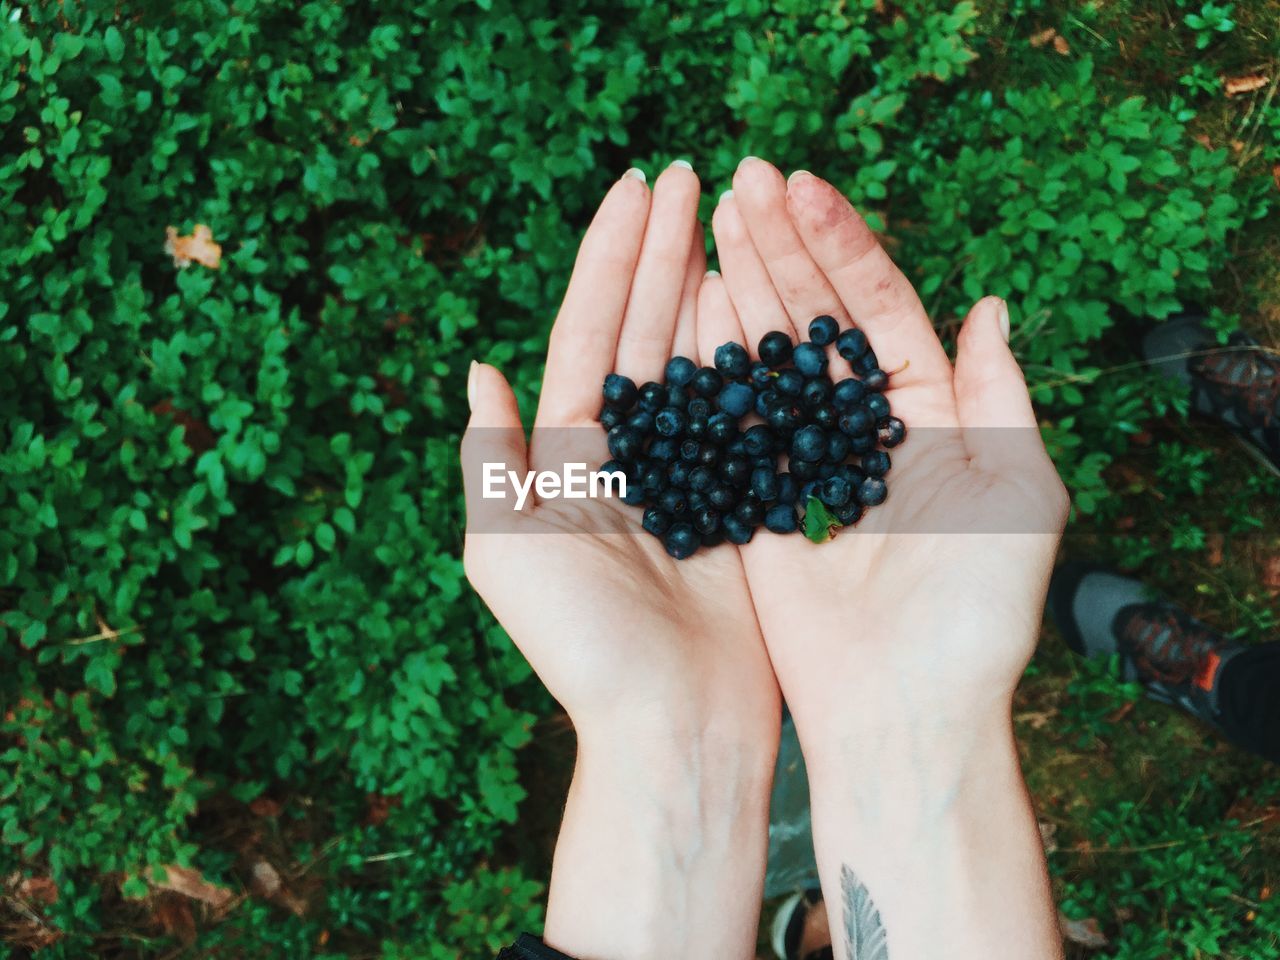 Cropped hand of woman holding blackberries against plant